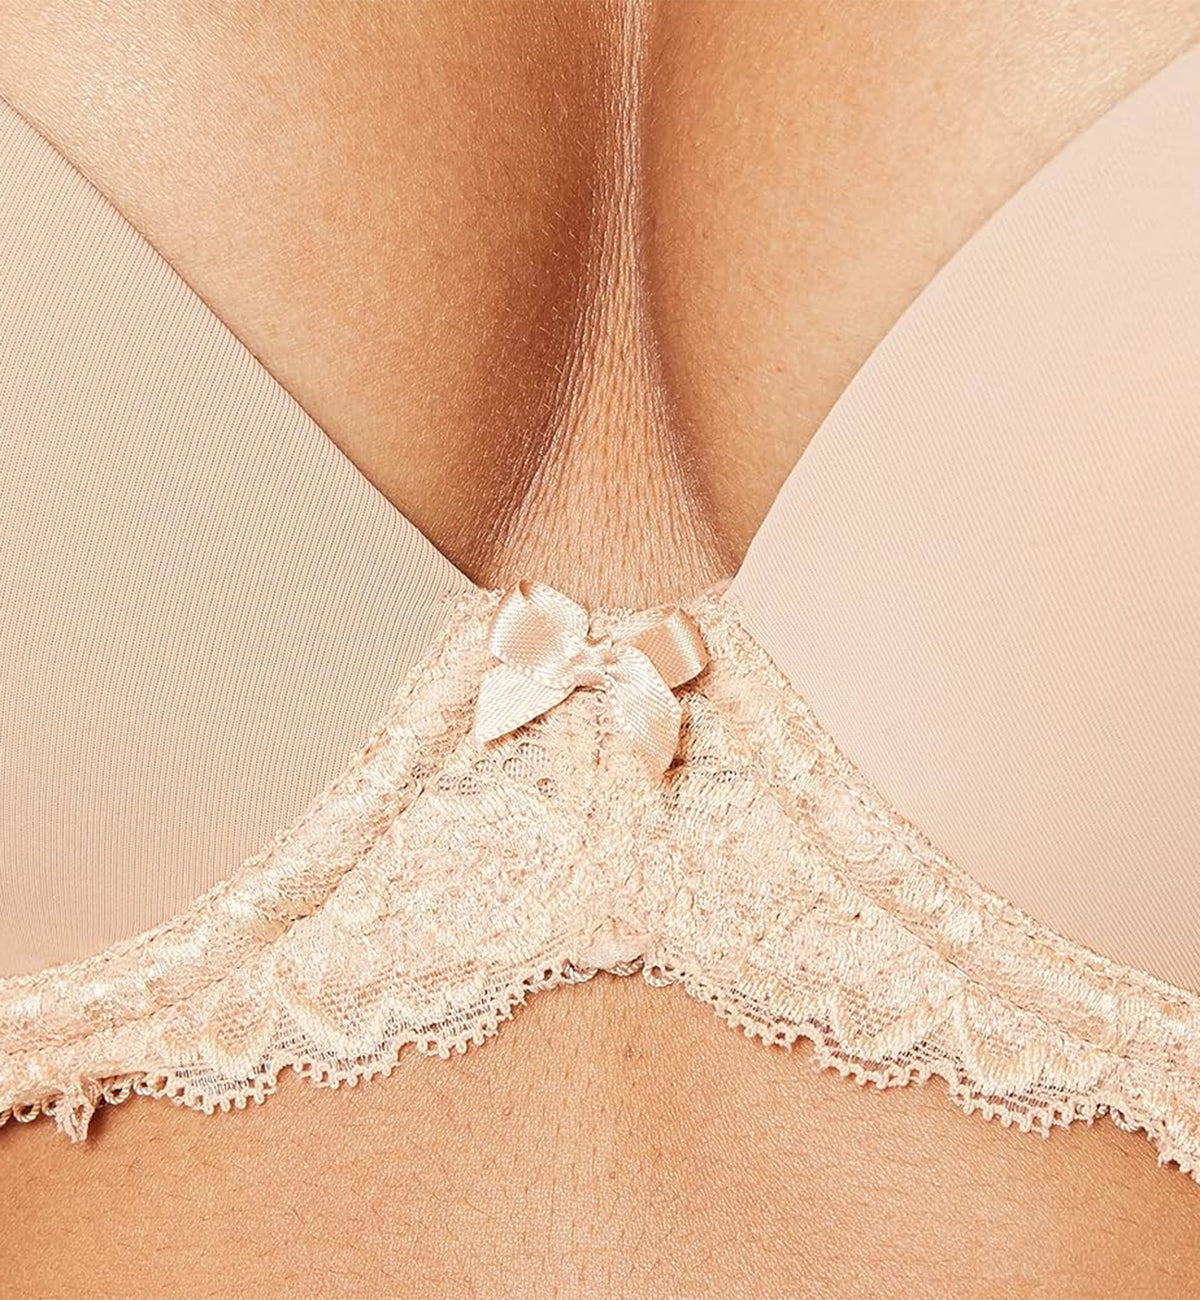 Pour Moi Forever Fiore Plunge Push Up Underwire T-shirt Bra (183309),30C,Almond - Almond,30C